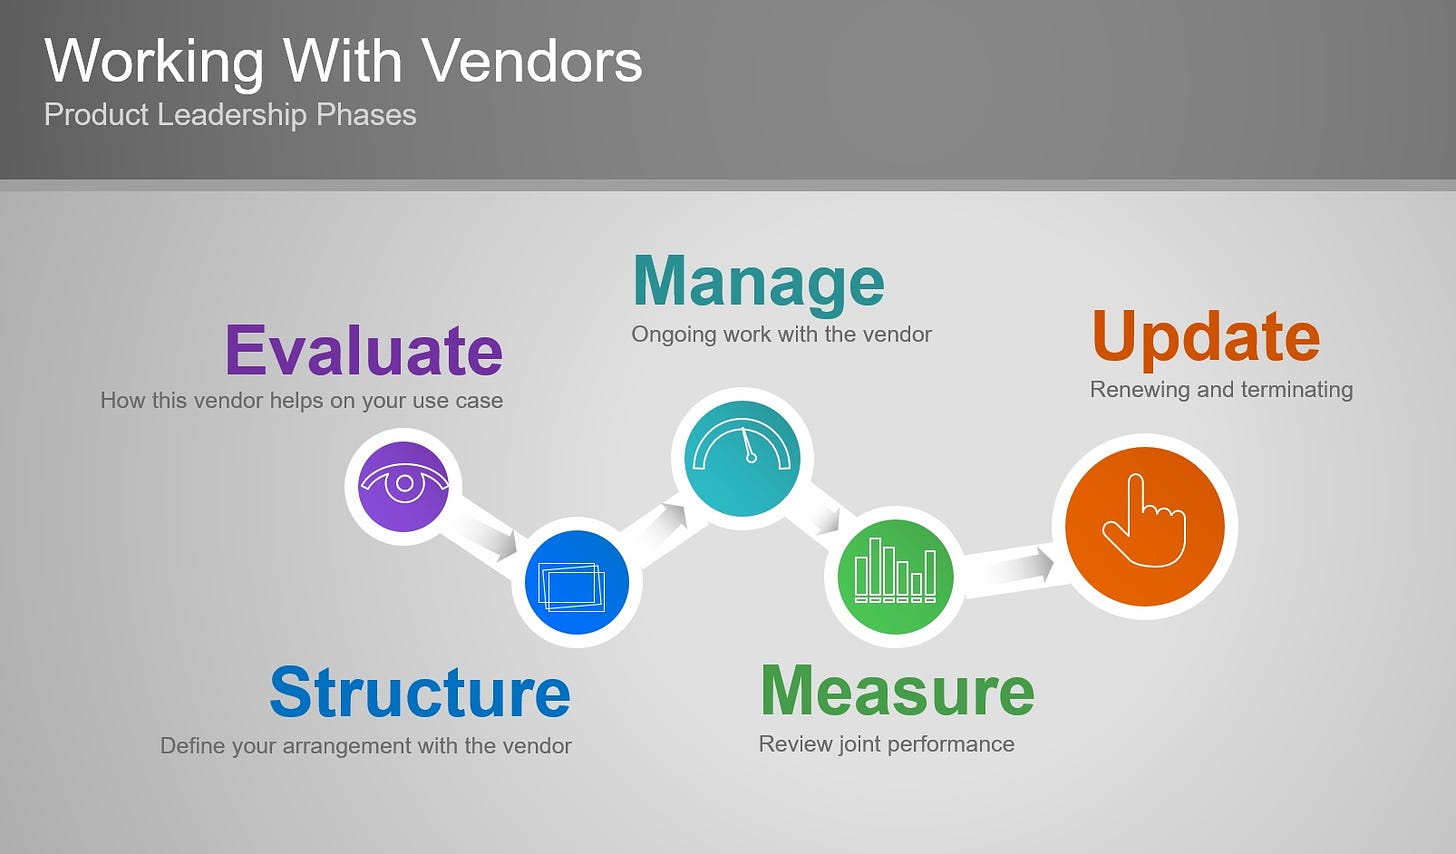 phases of vendor management: evaluate, structure, manage, measure and update